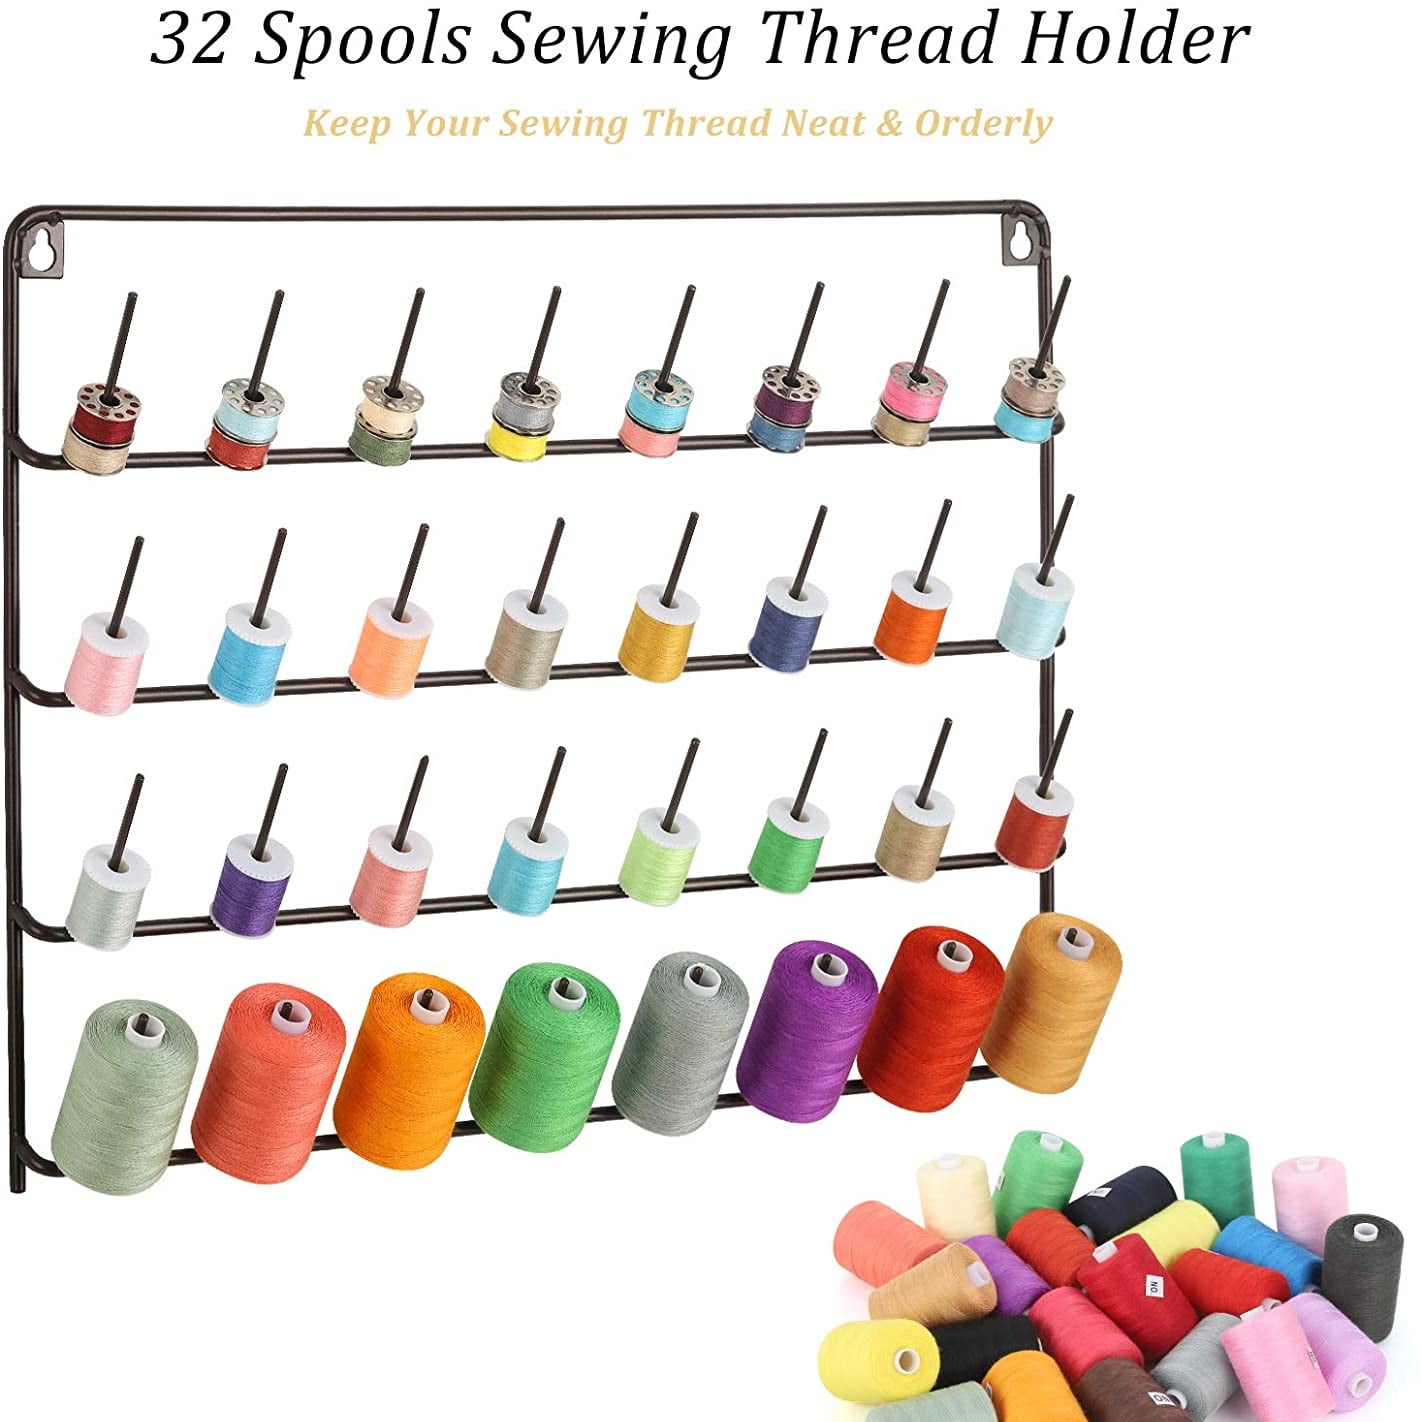  HAITARL 32-Spool Sewing Thread Rack, Wall-Mounted Metal Sewing  Thread Holder with Hanging Tools, Metal Rack for Organize Sewing Thread,  Embroidery-Suitable for Large Thread, Brown